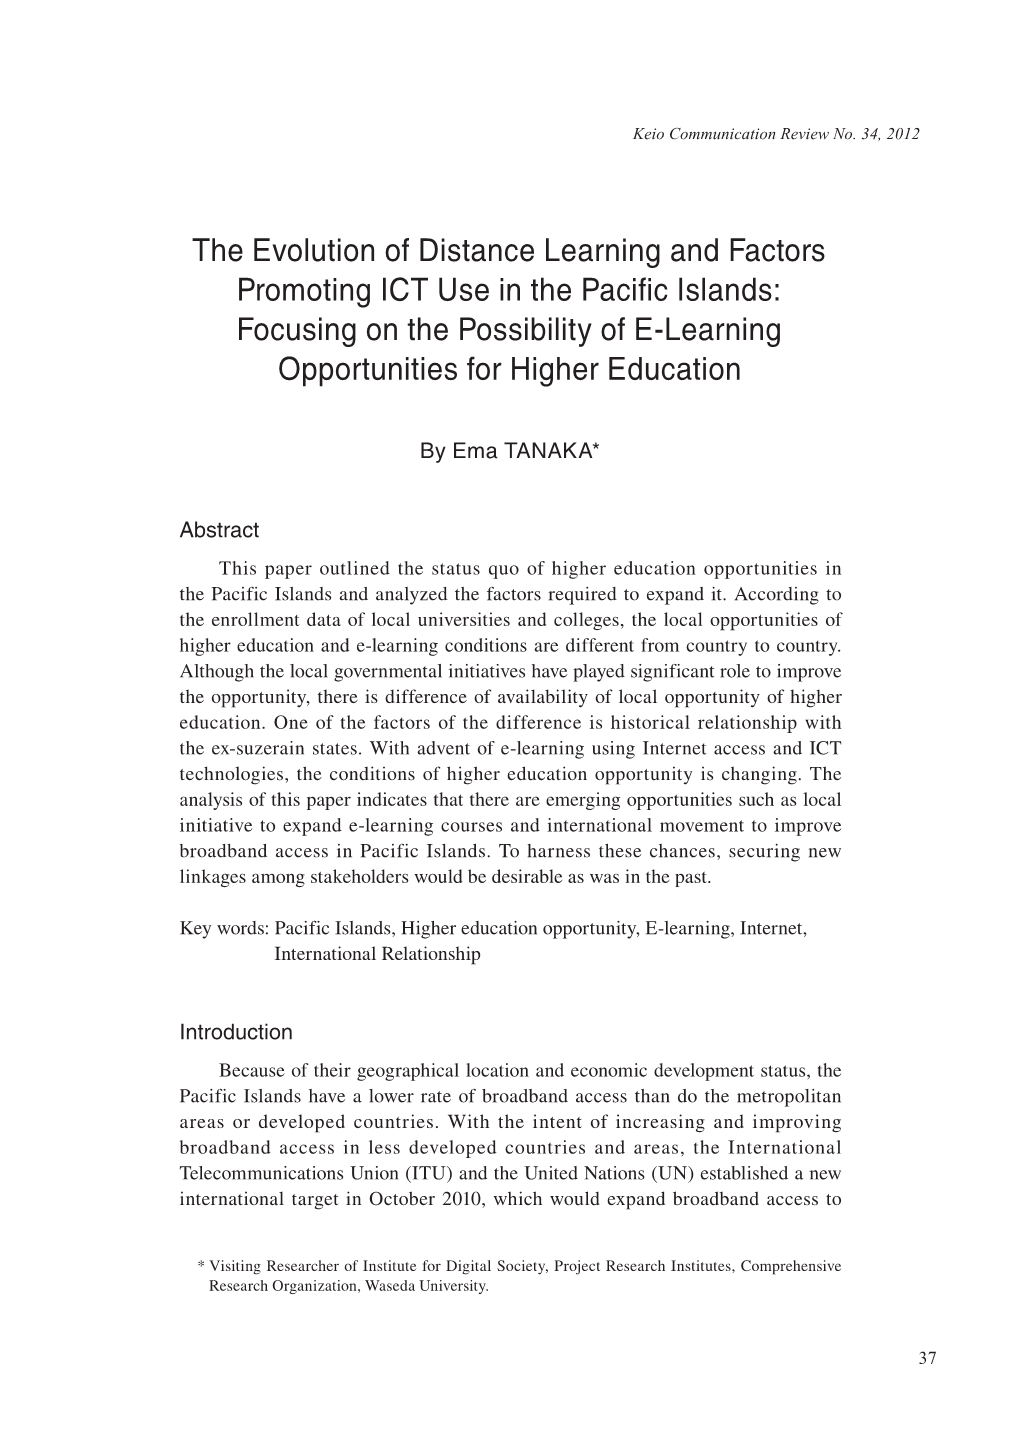 The Evolution of Distance Learning and Factors Promoting ICT Use in the Pacific Islands: Focusing on the Possibility of E-Learning Opportunities for Higher Education